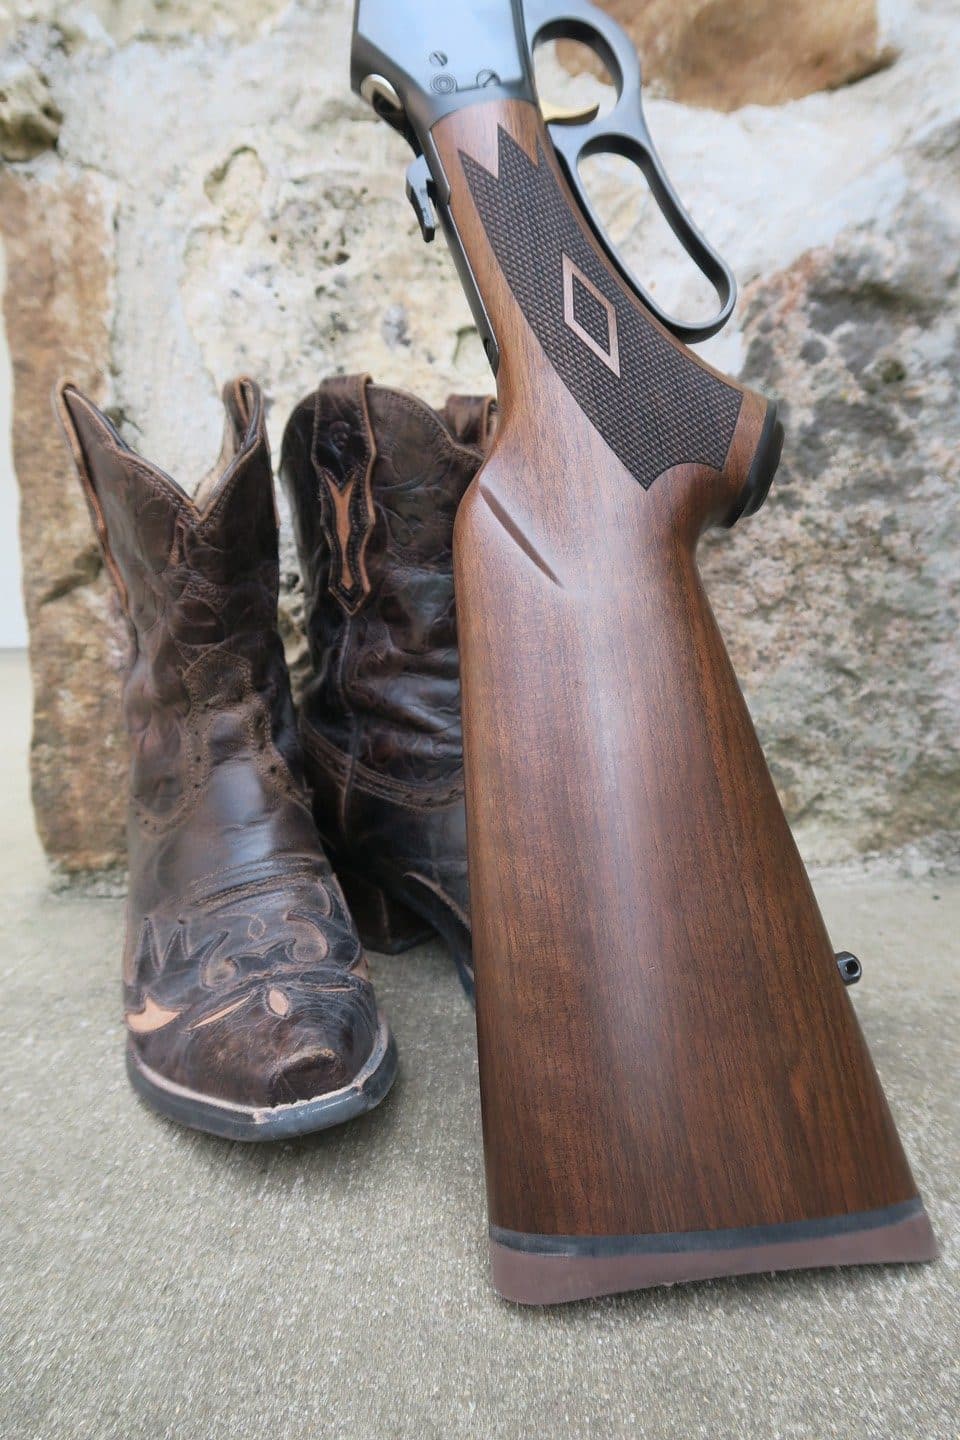 boots and Marlin 336